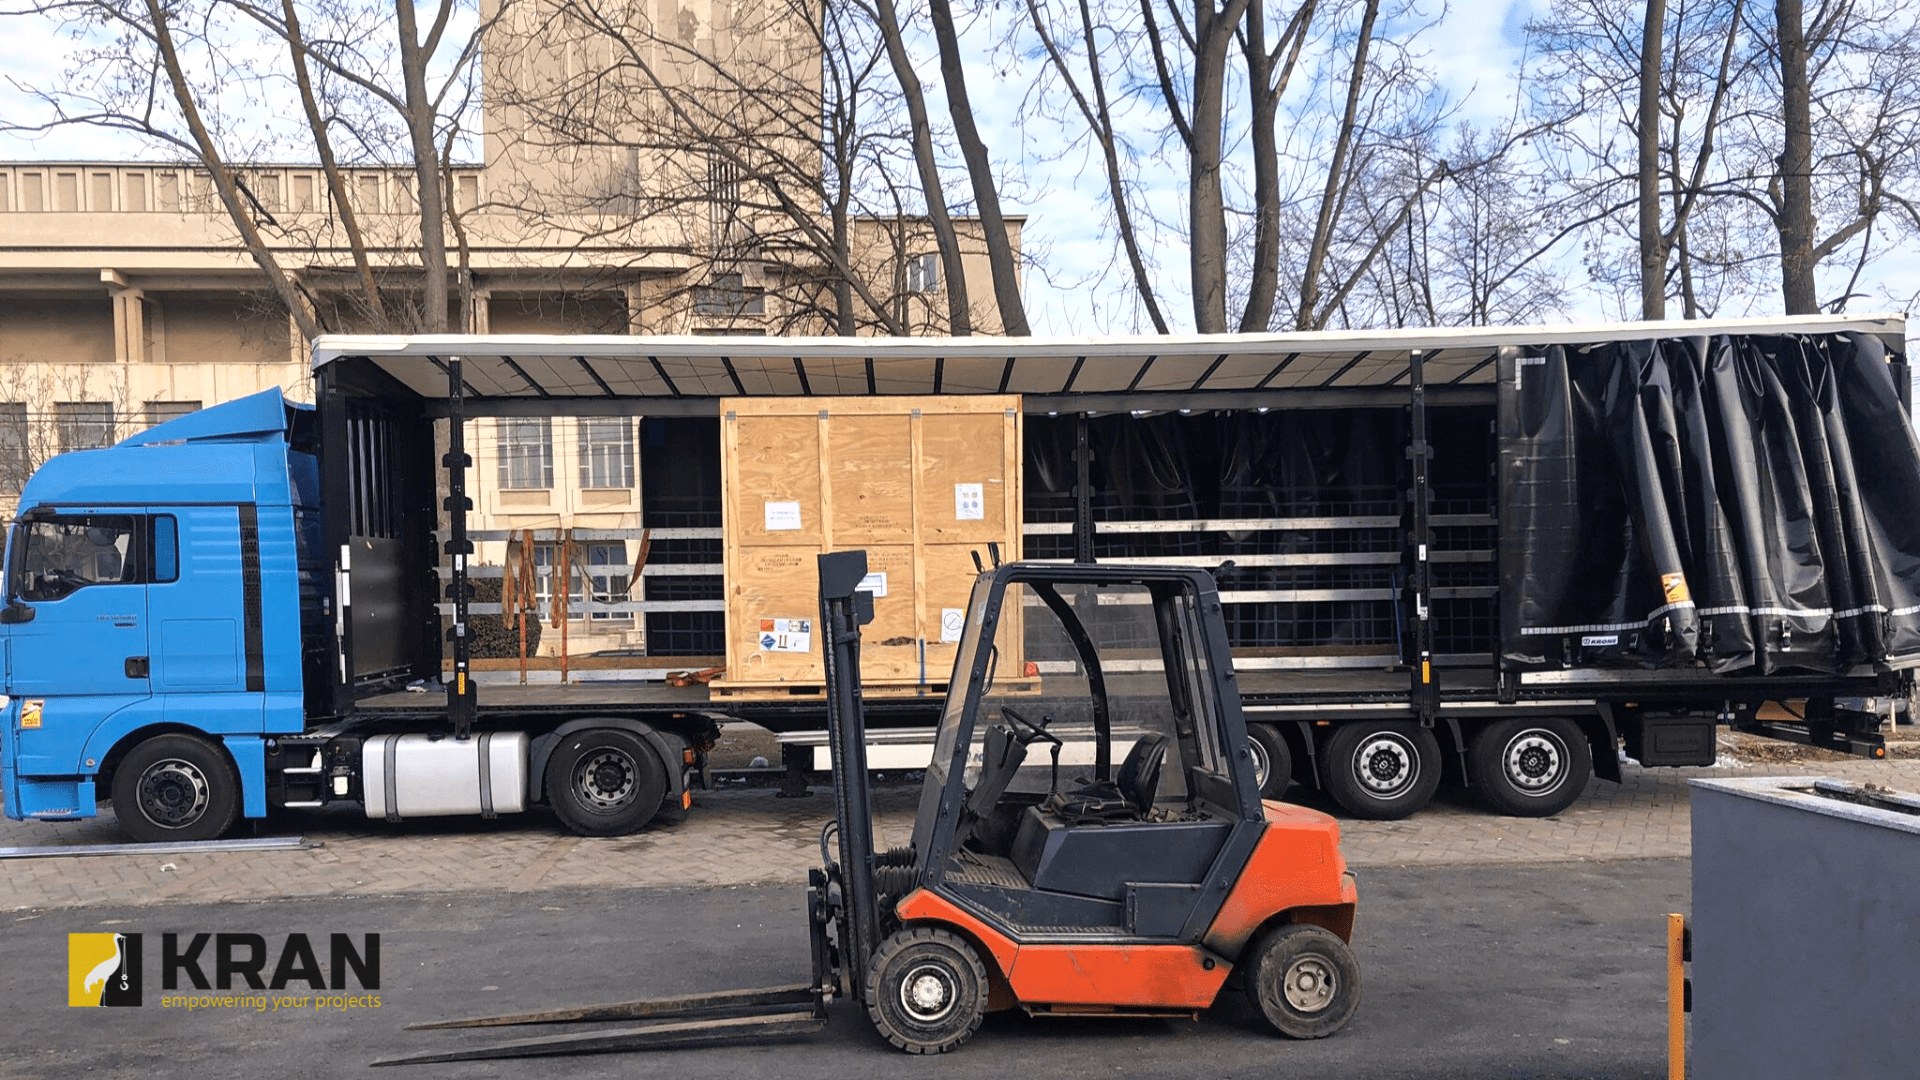 Unloading a medical equipment with a forklift rental service